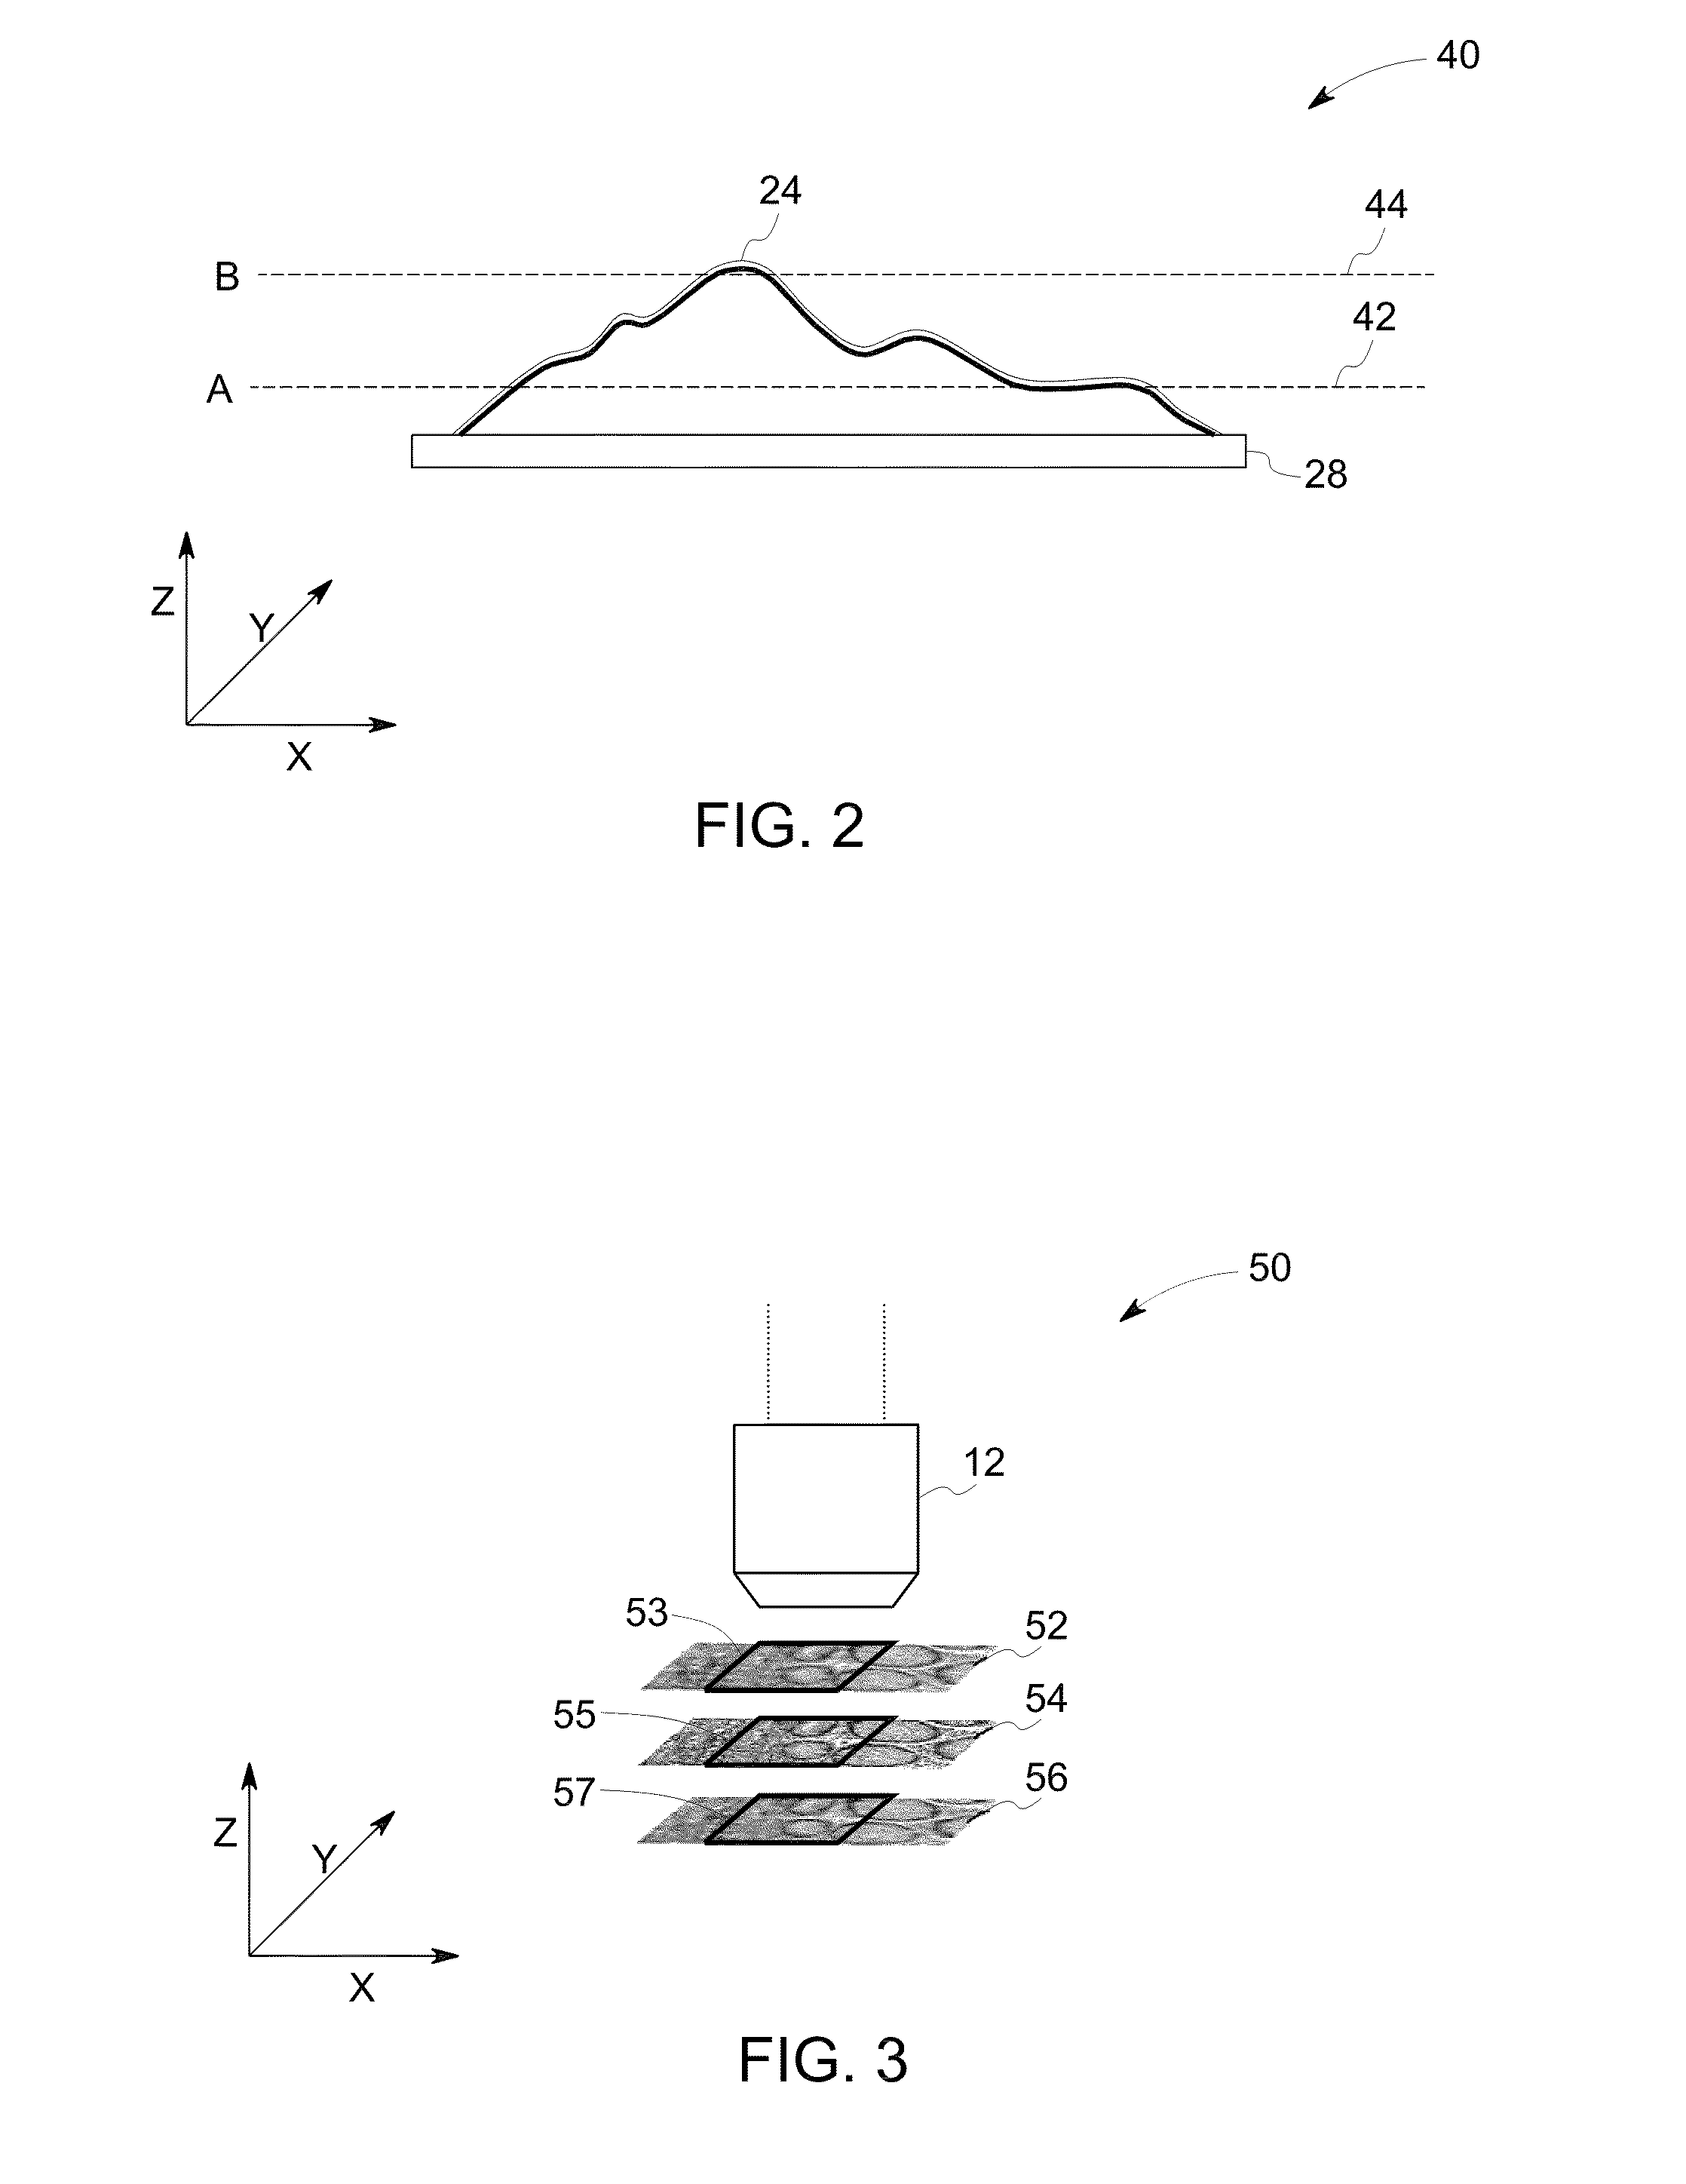 System and method for imaging with enhanced depth of field